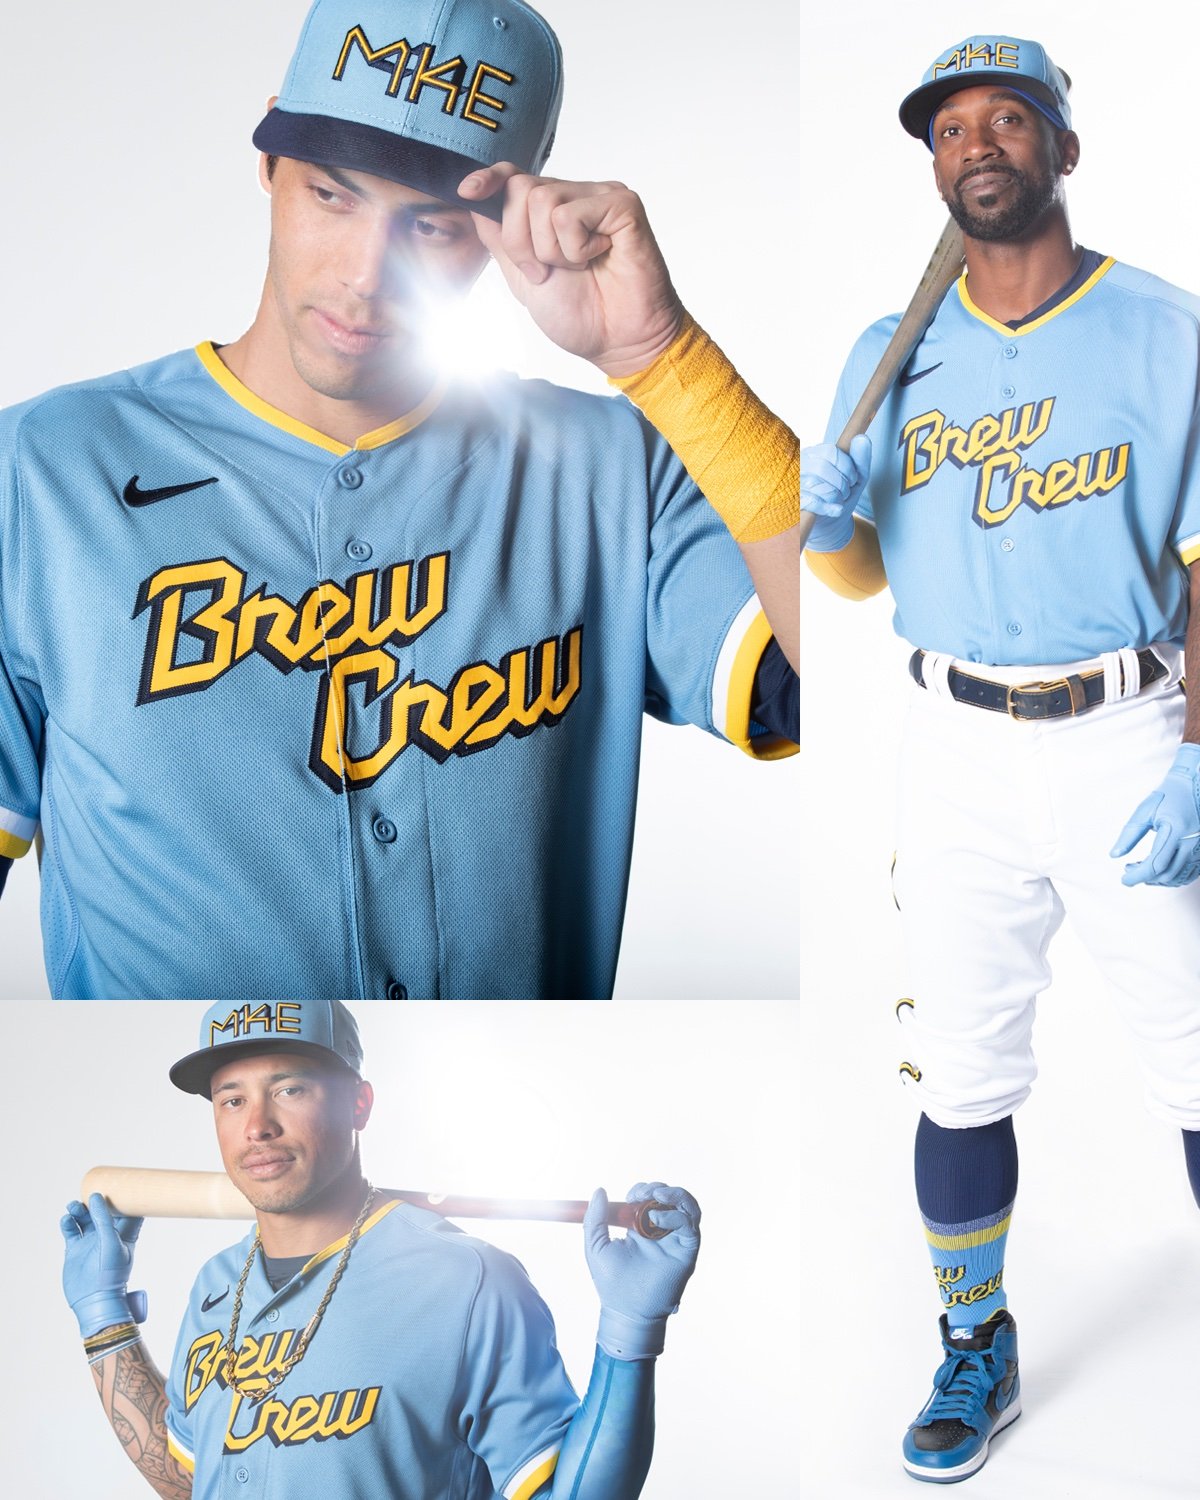 Catonsville resident among finalists in Milwaukee Brewers uniform design  contest